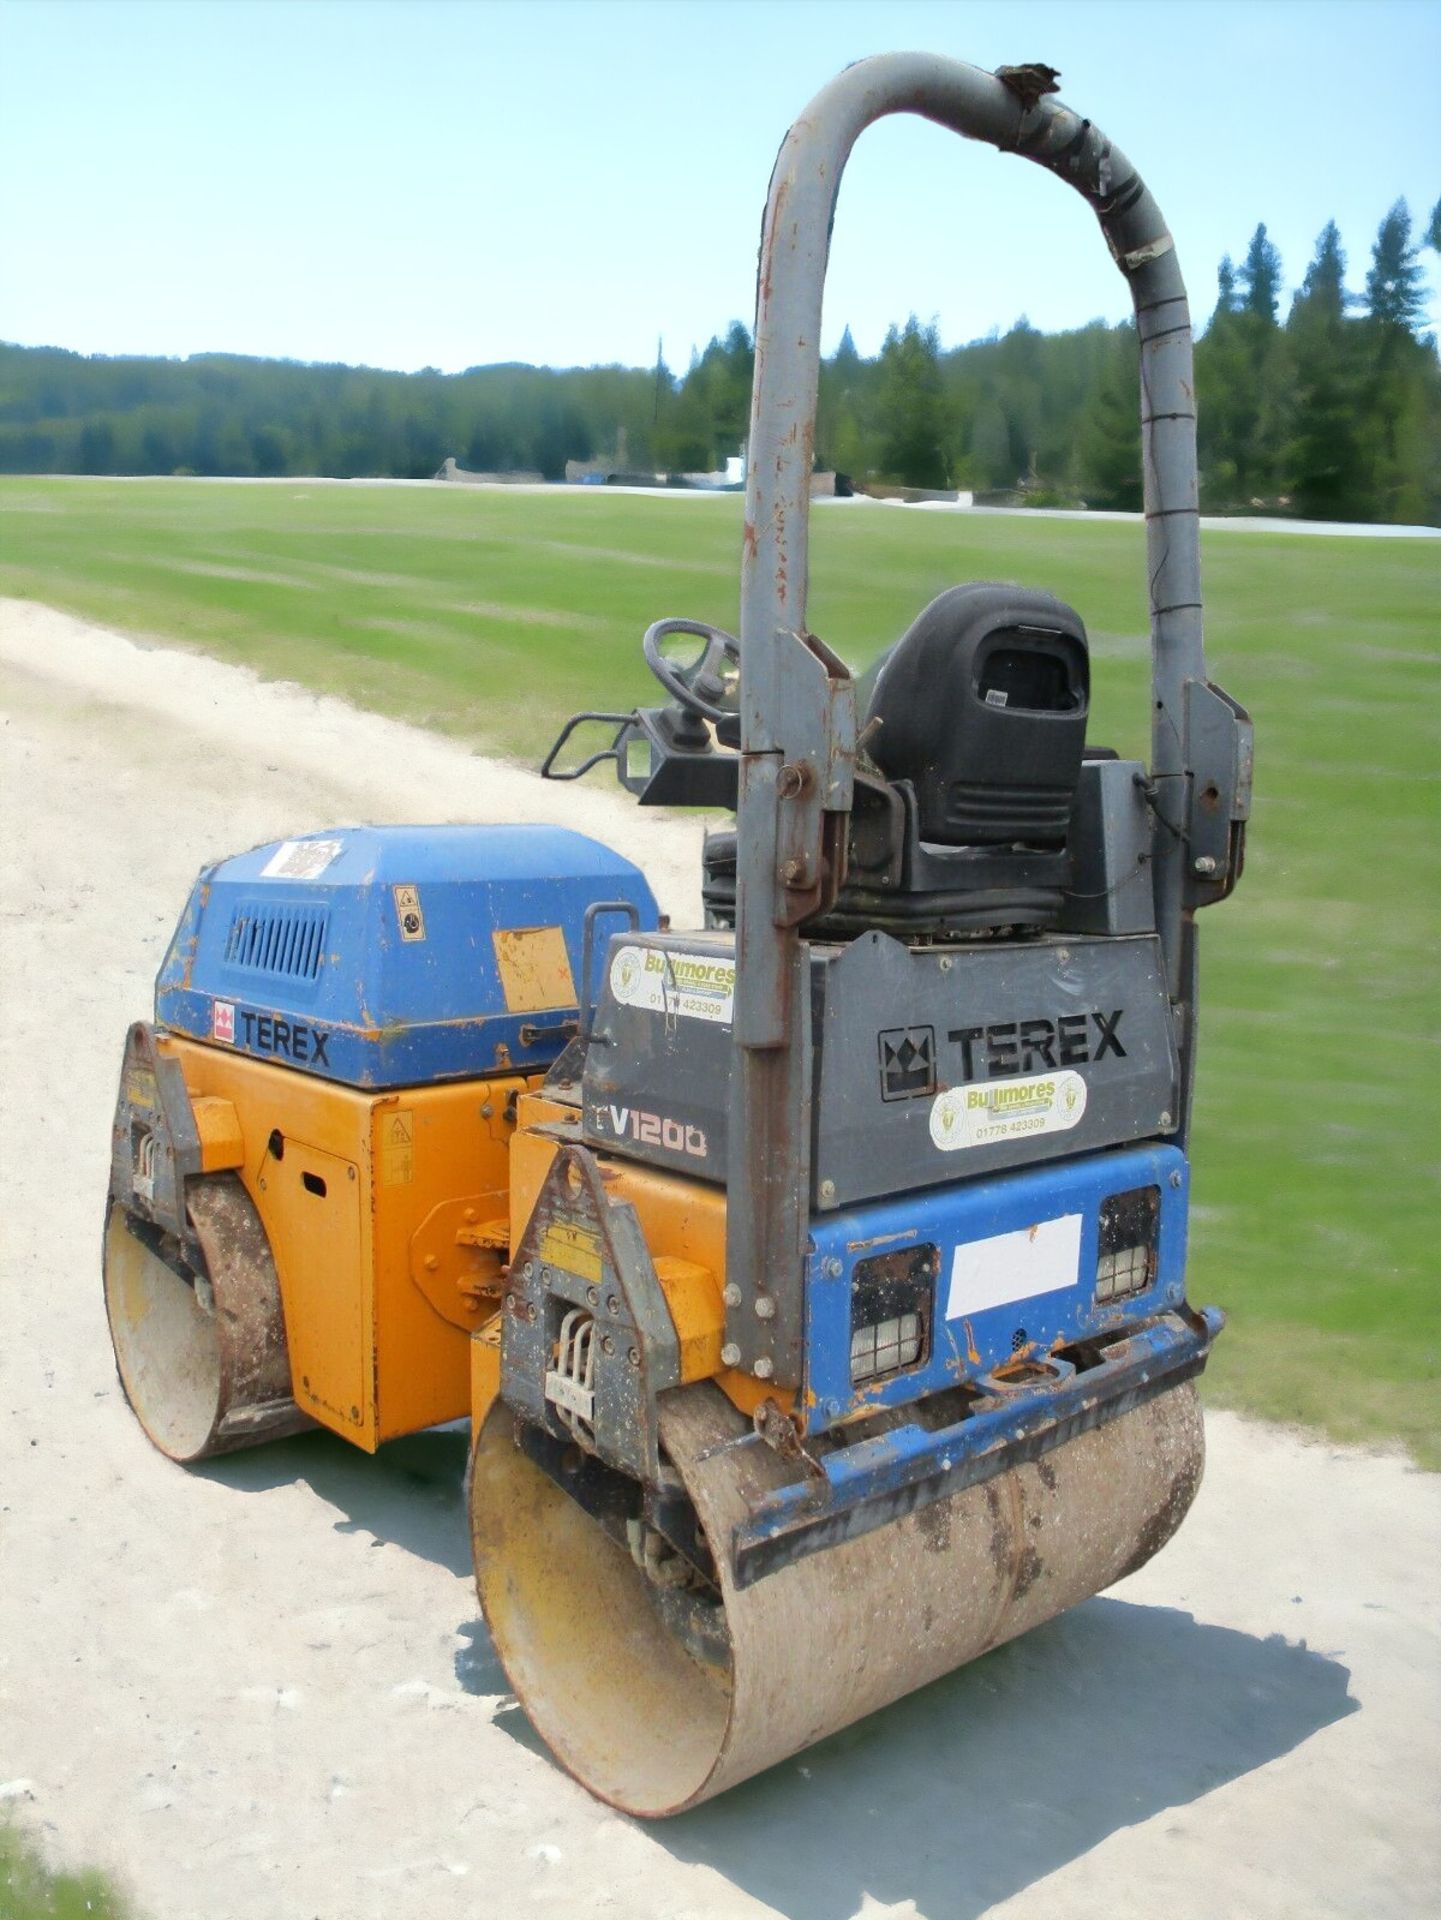 ACHIEVE SMOOTH AND UNIFORM COMPACTION WITH THE TEREX TV1200 ROLLER - Bild 4 aus 10